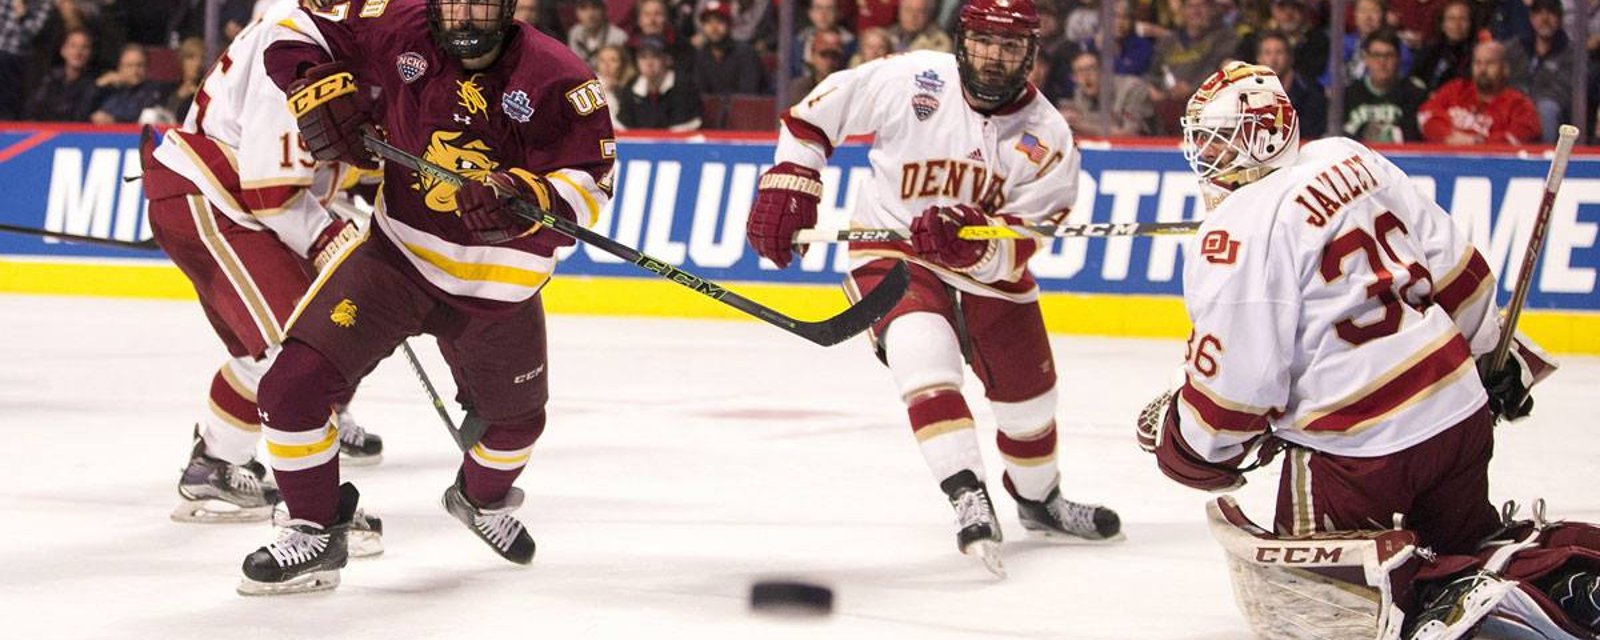 Top NCAA free agent turns his back on his team